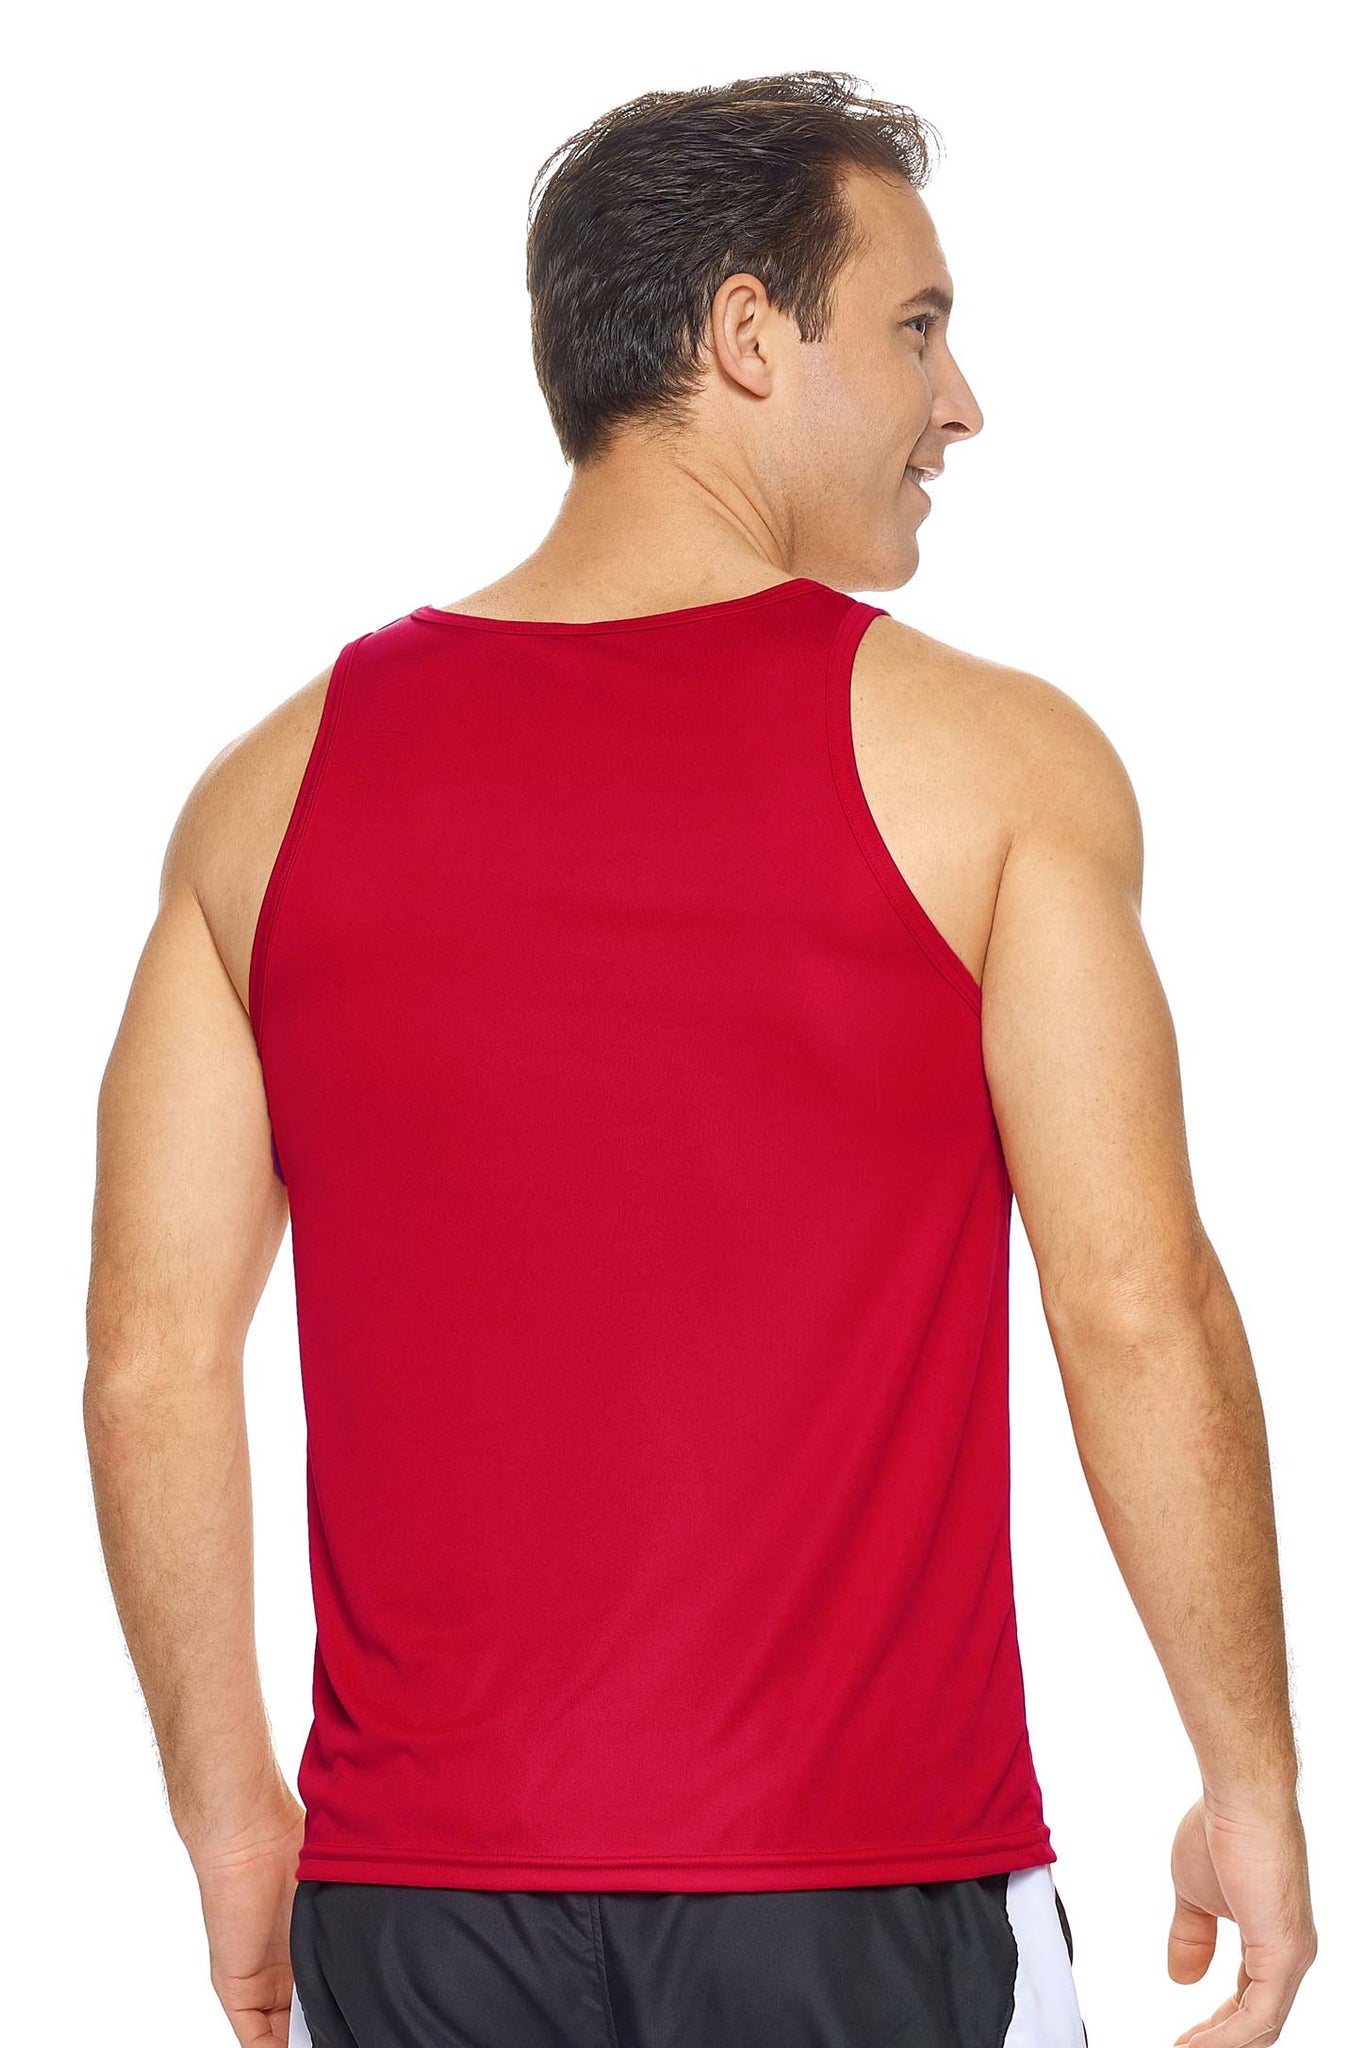 Expert Brand Wholesale Men's DriMax Endurance Tank AI827 Red image 3#red